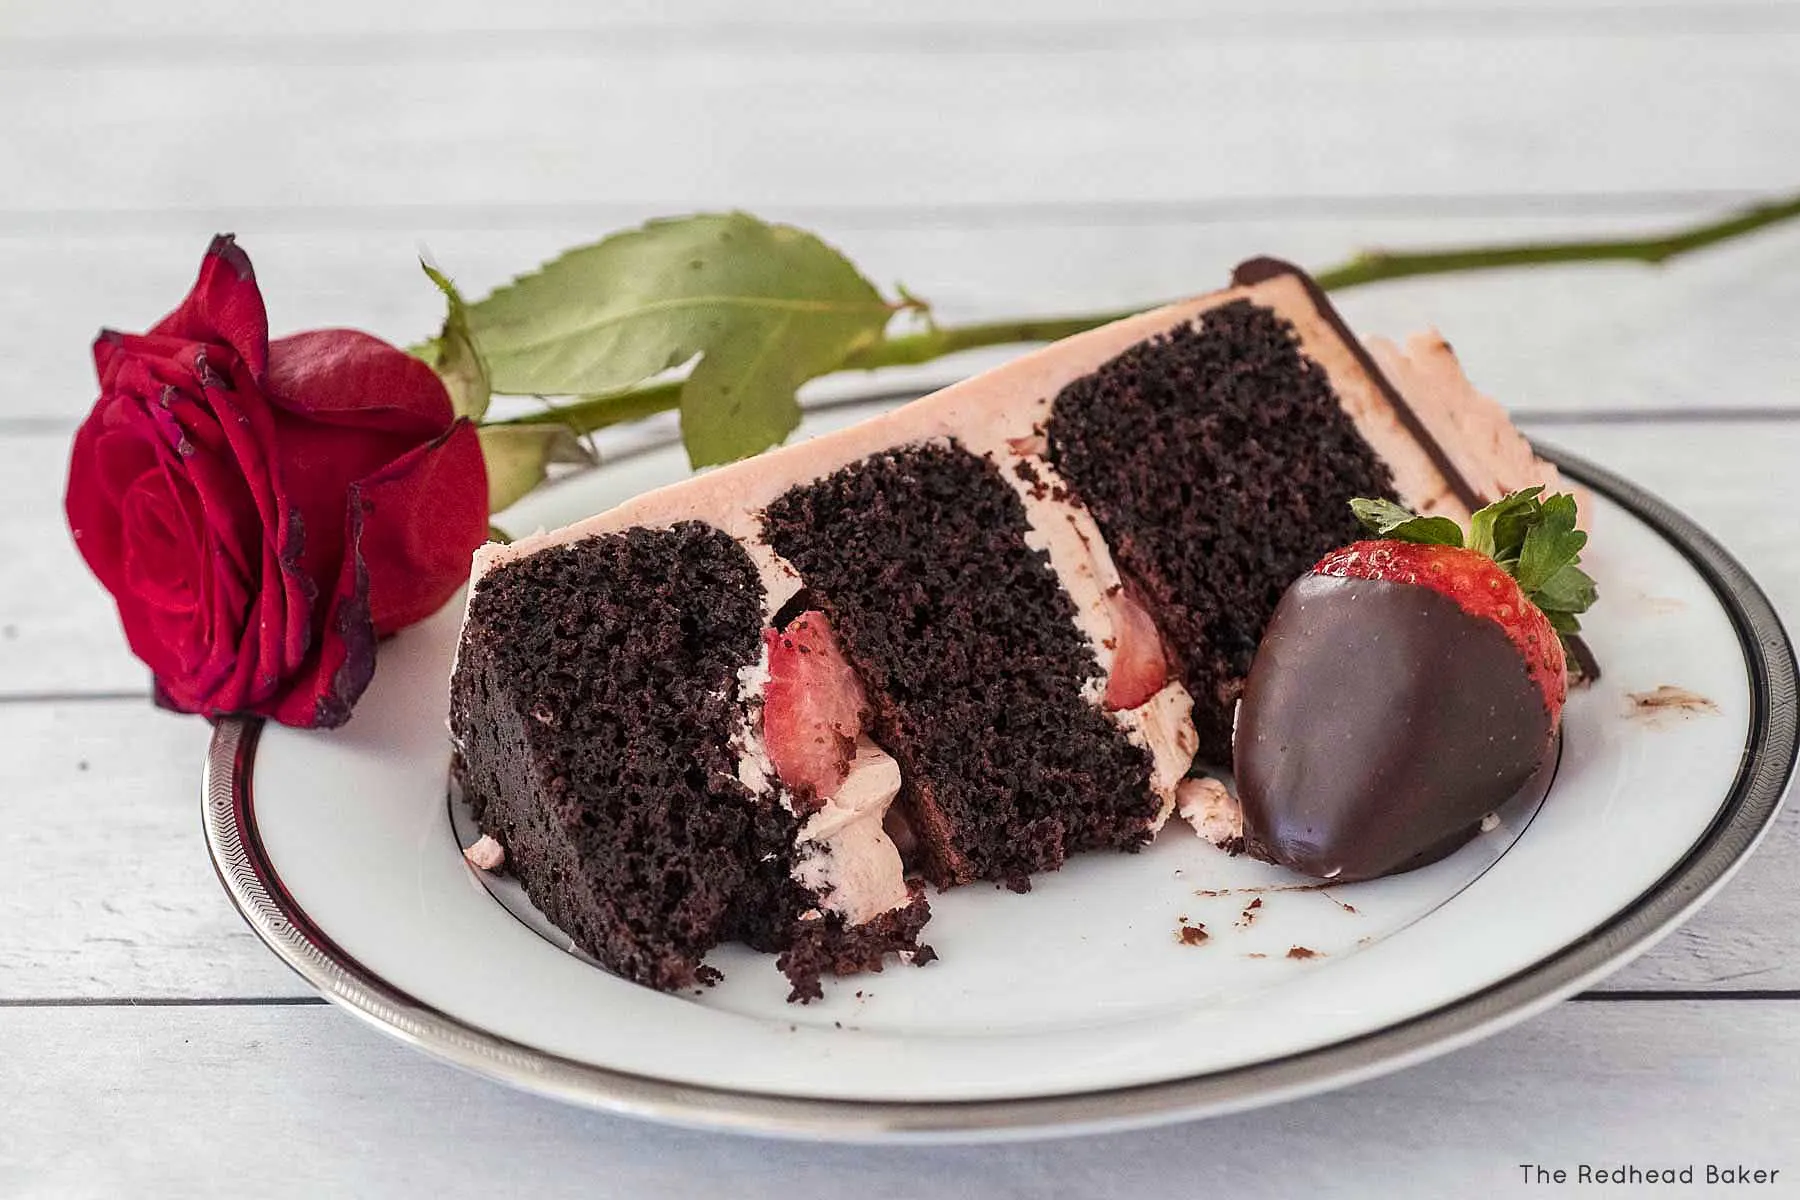 A slice of chocolate layer cake with strawberry frosting and a rose on a white plate.